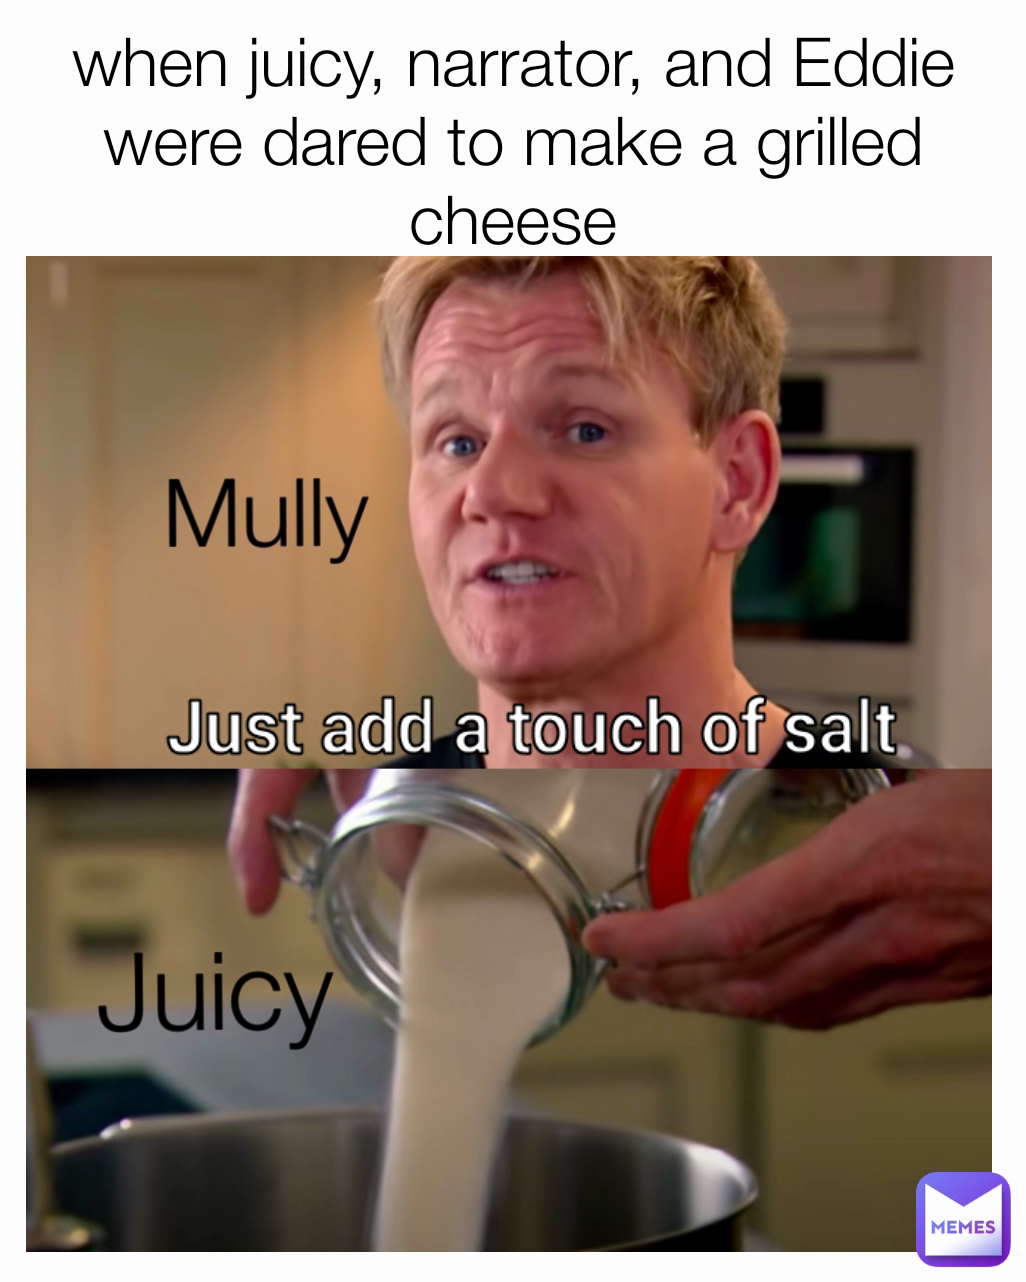 when juicy, narrator, and Eddie were dared to make a grilled cheese Juicy Mully